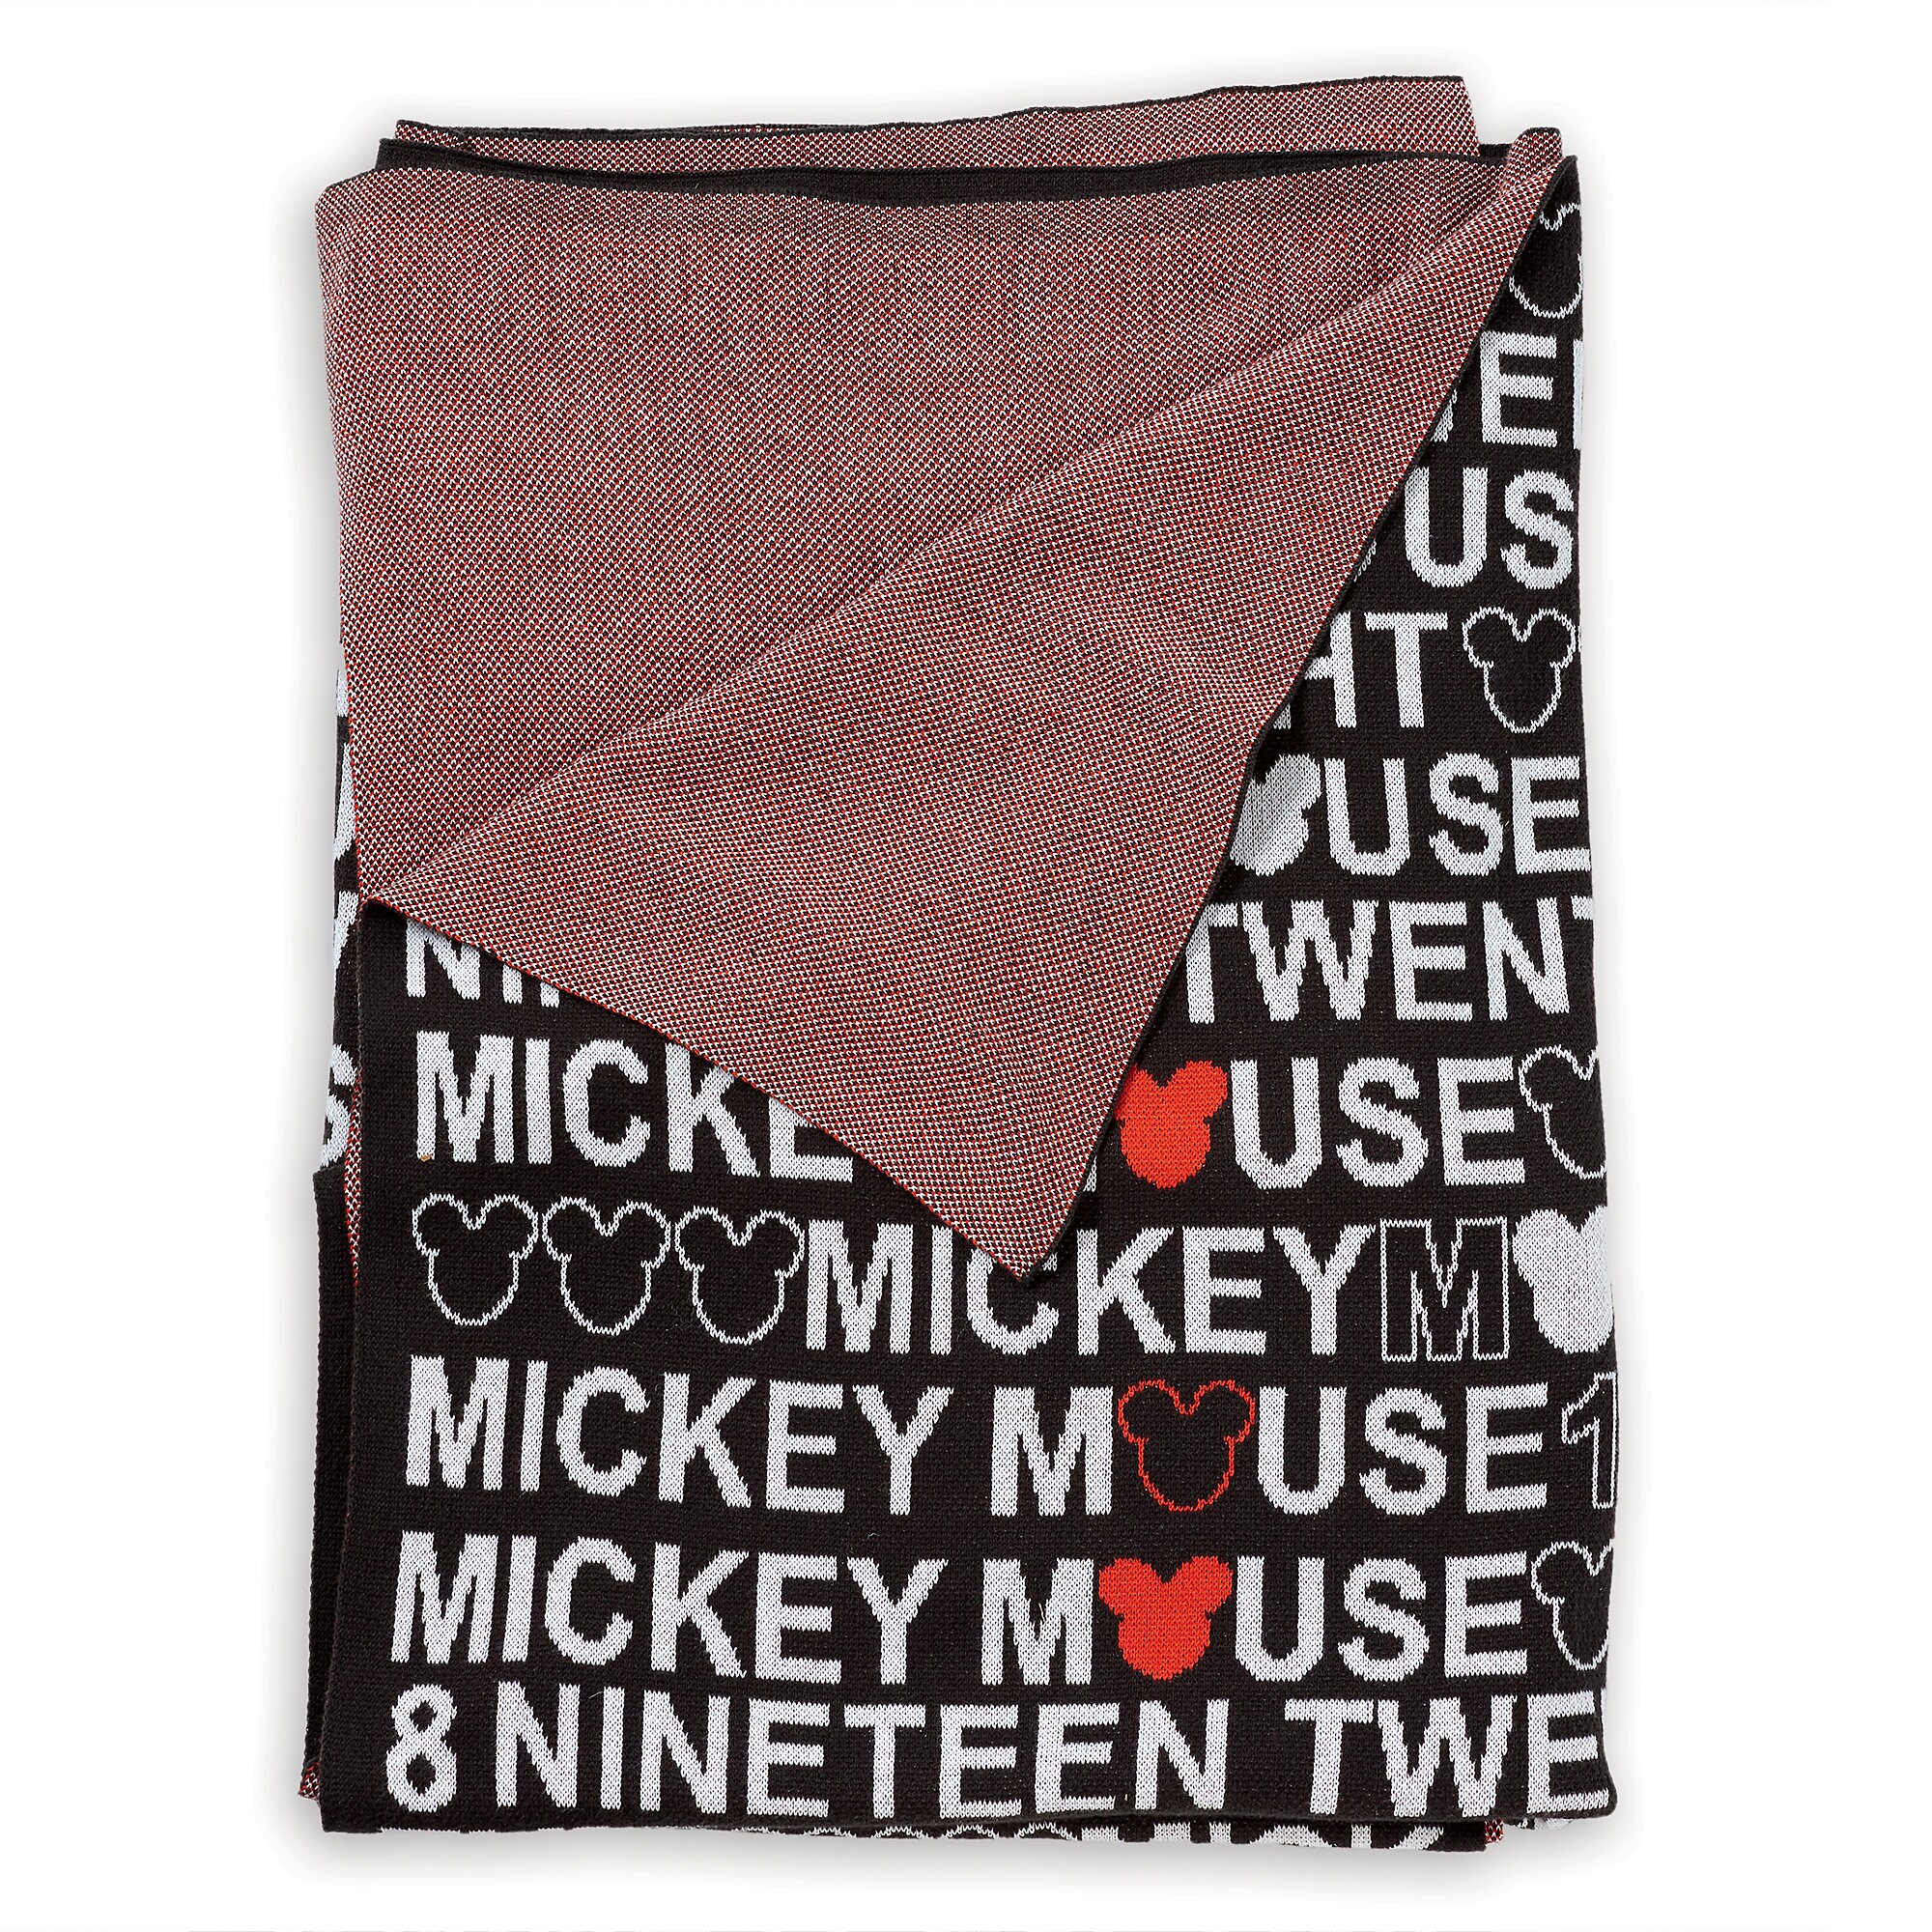 Mickey Mouse 1928 Knit Throw by Ethan Allen